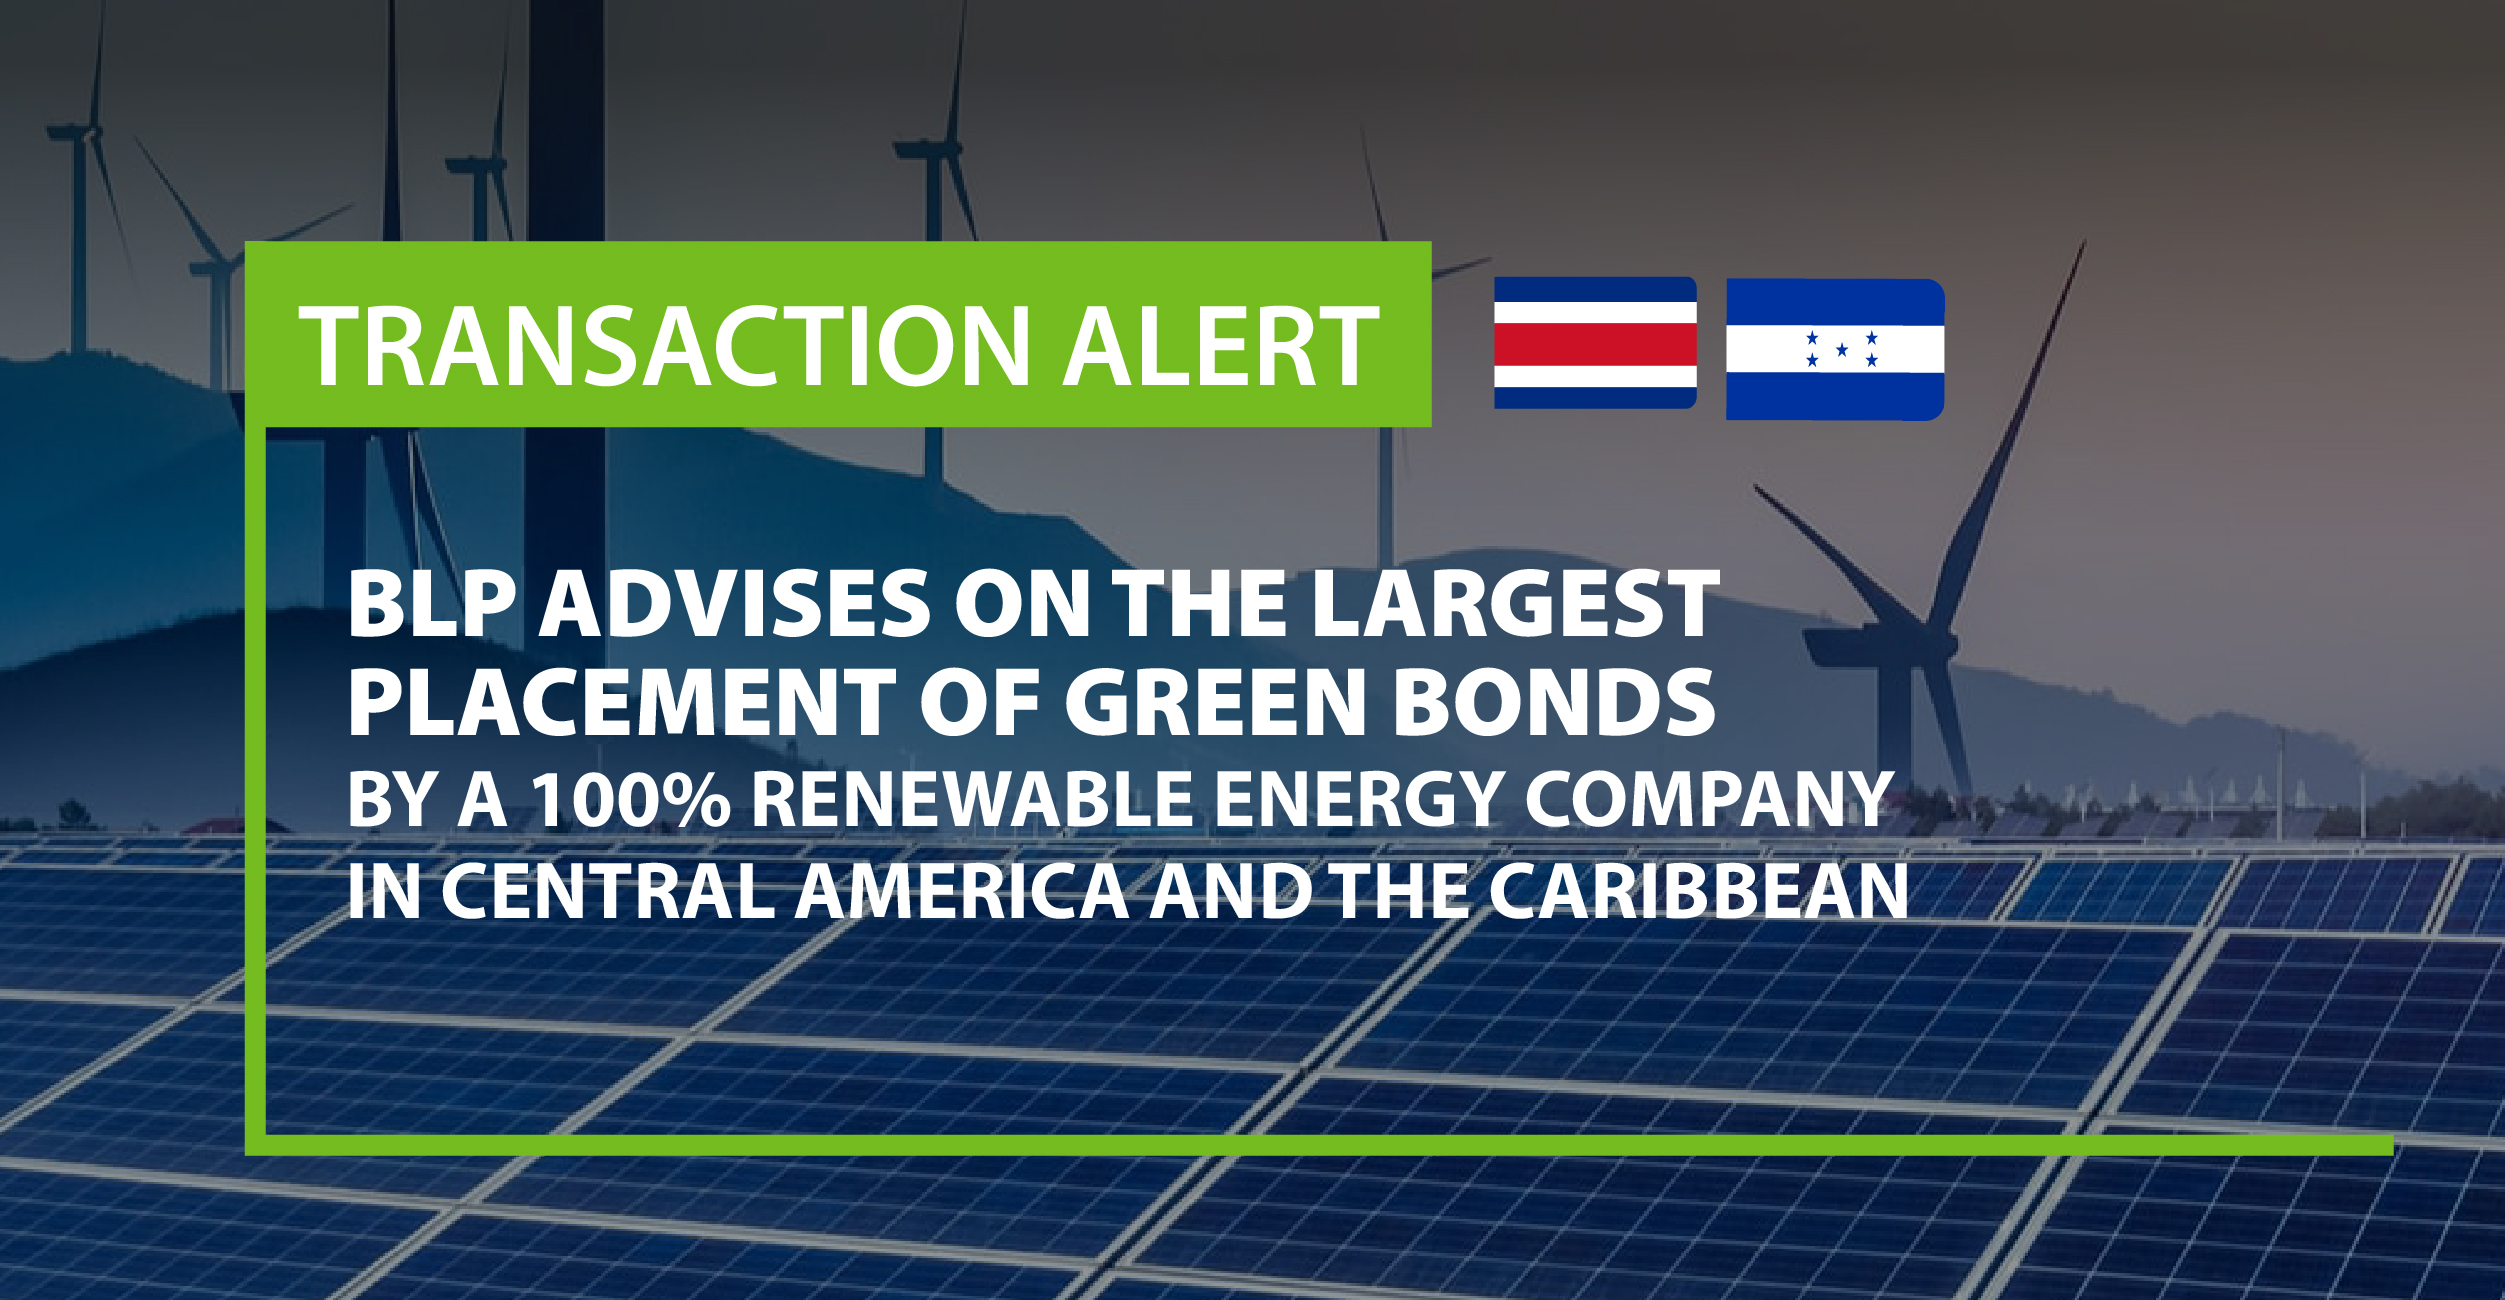 BLP advises on the largest placement of green bonds by a 100% renewable energy company in Central America and the Caribbean